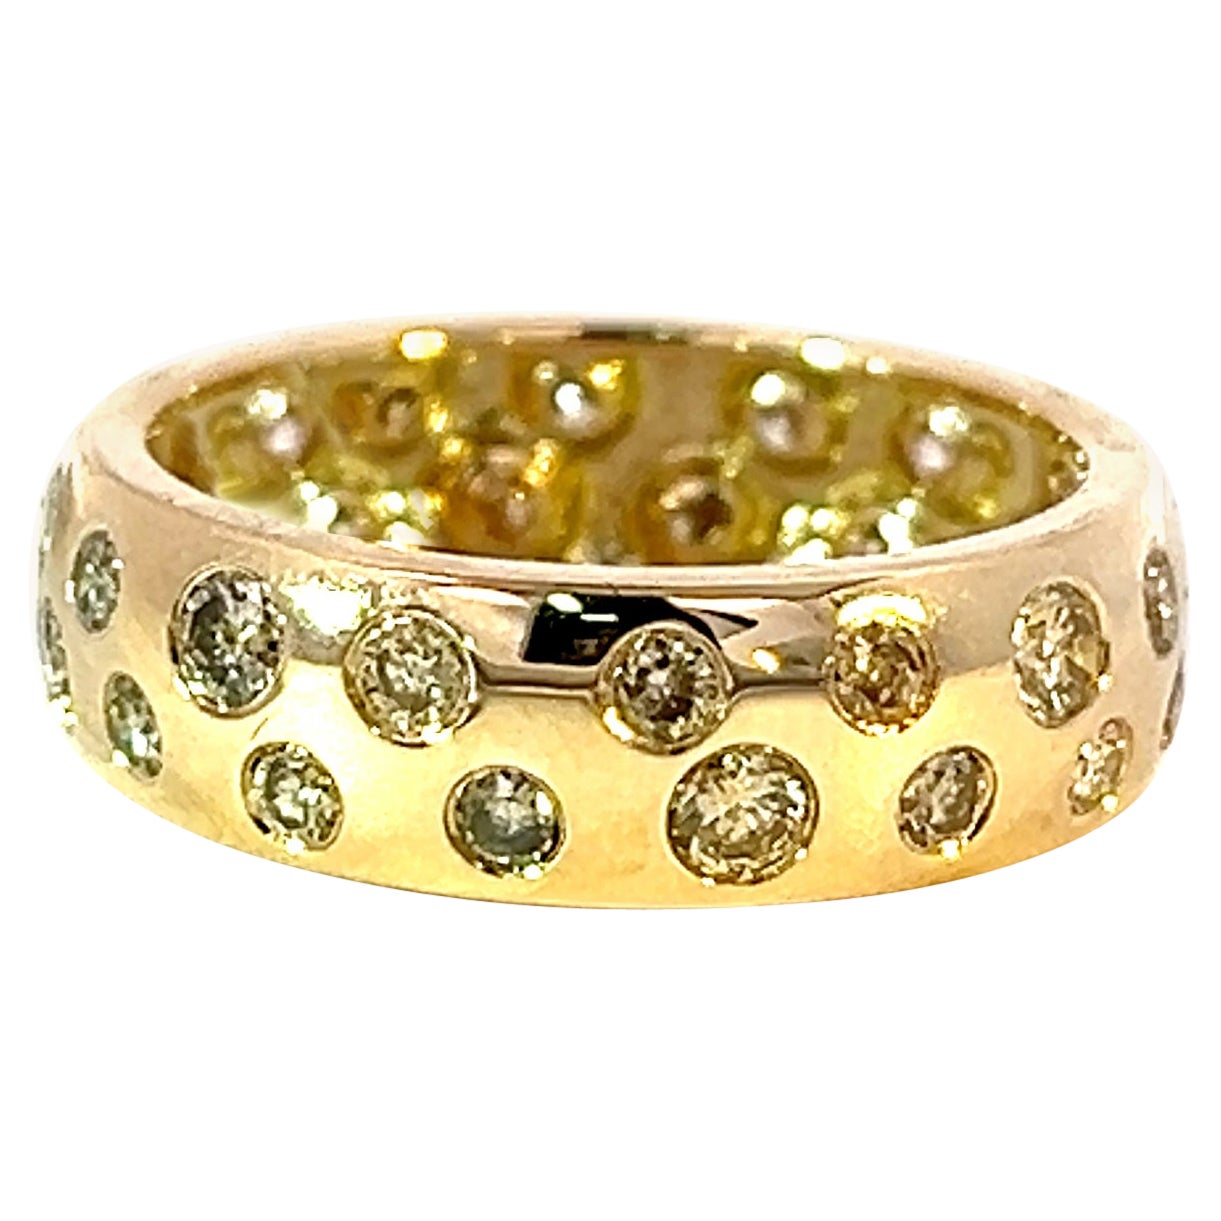 Exclusive 14k Yellow Gold 1.27 Carat Polka dot Fancy Color Diamond Band Ring